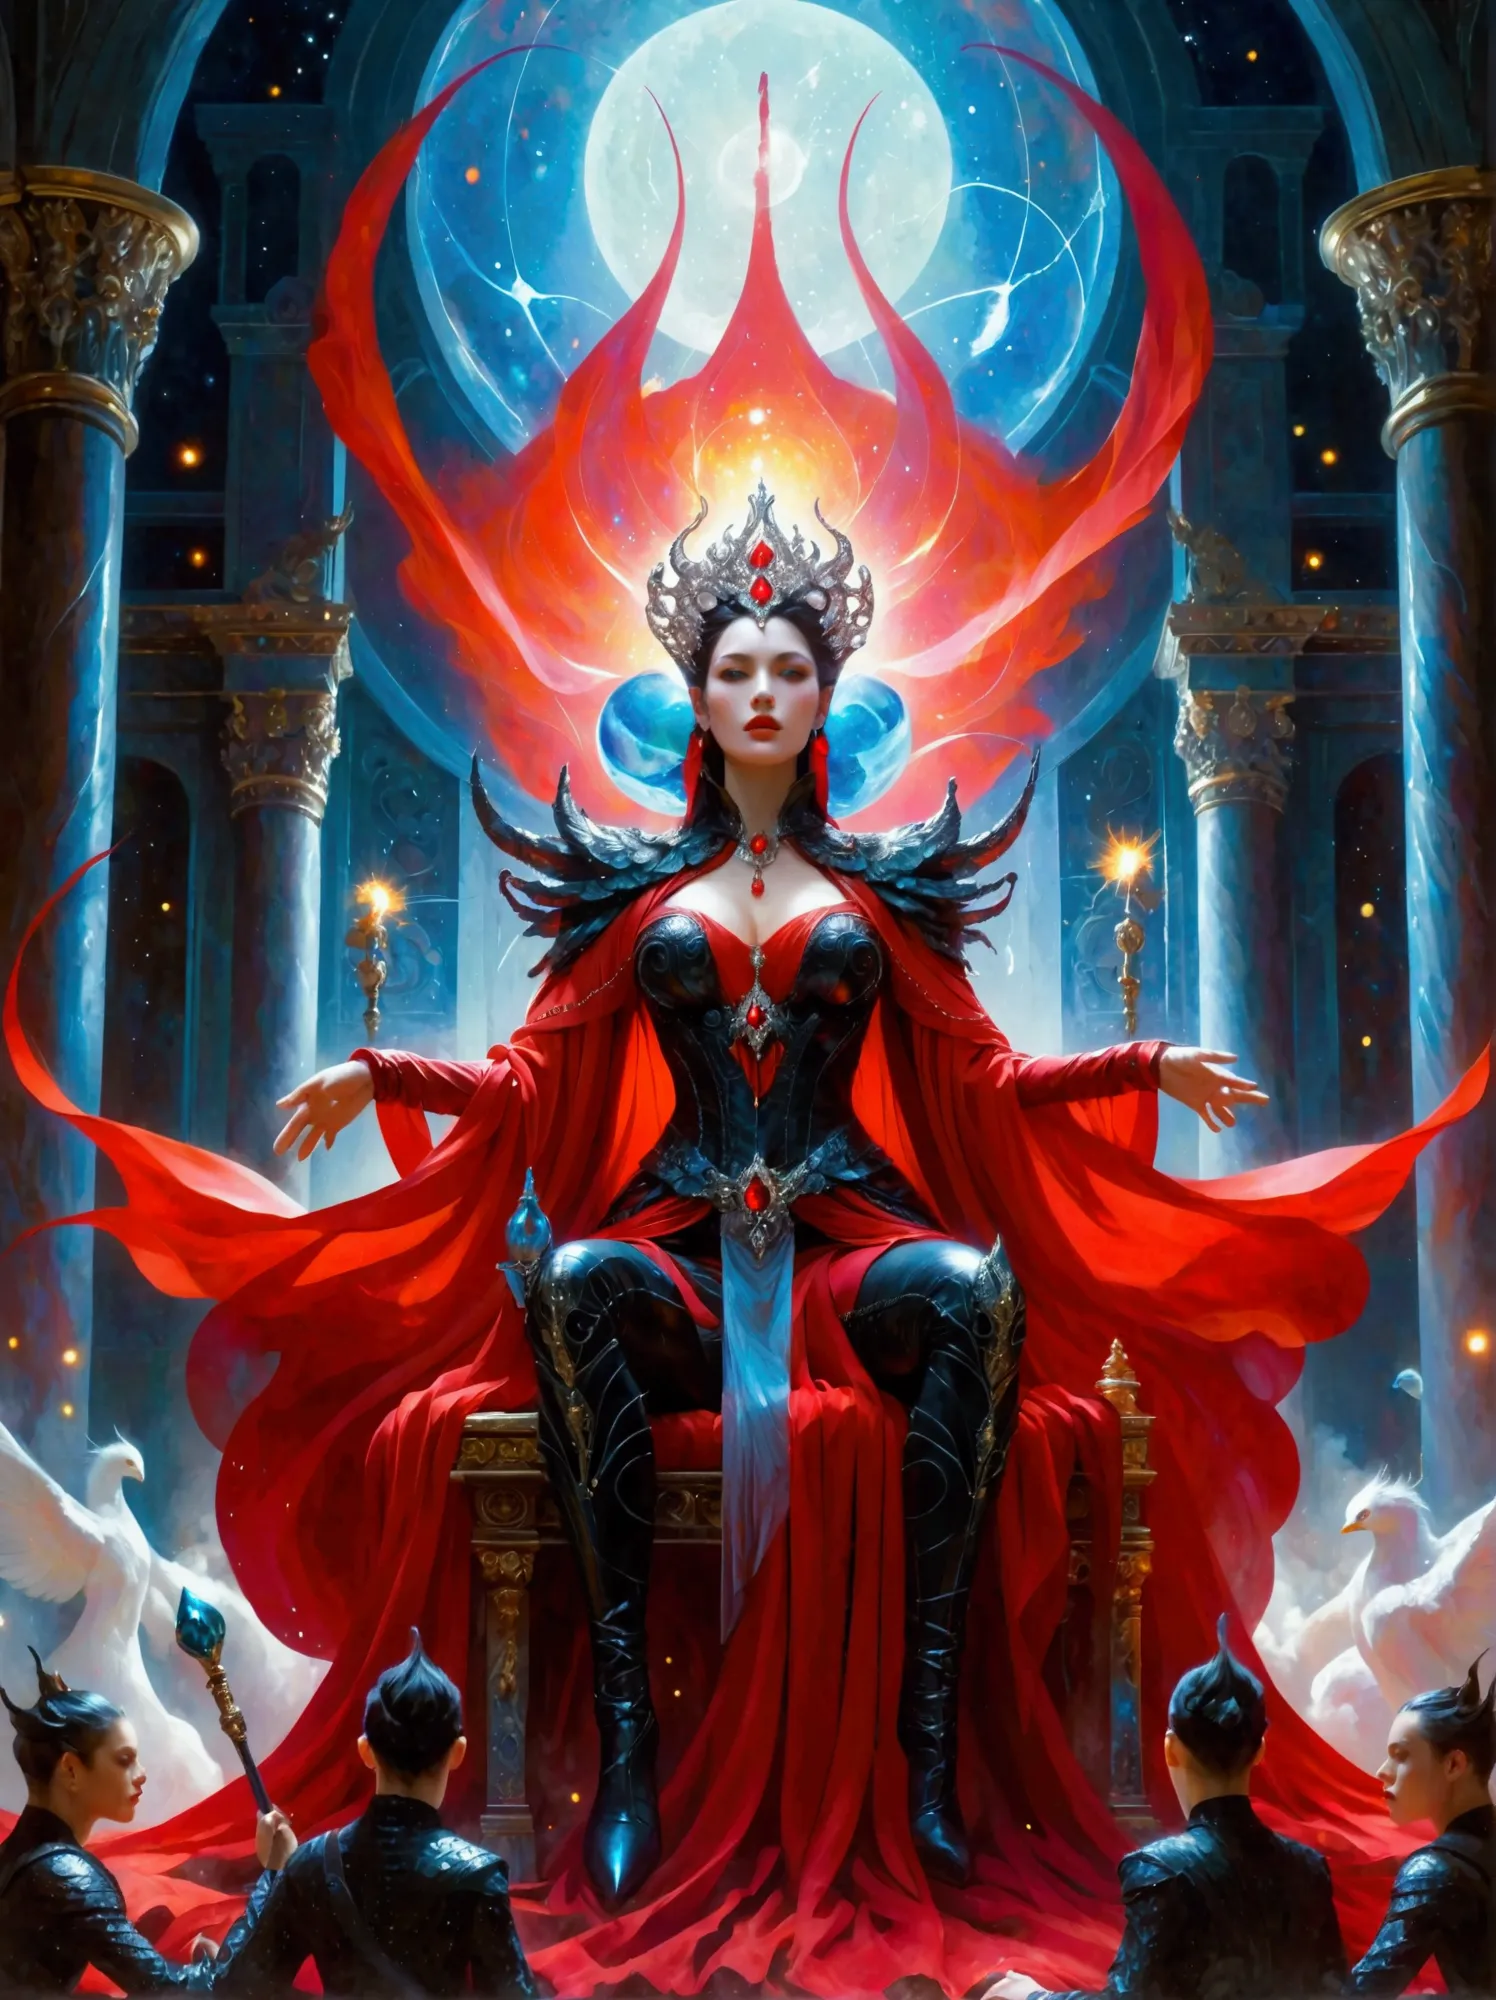 A gigantic mystical sorceress with vibrant red garments holds sway over a dystopian Earth. The relentless figure sits on an enor...